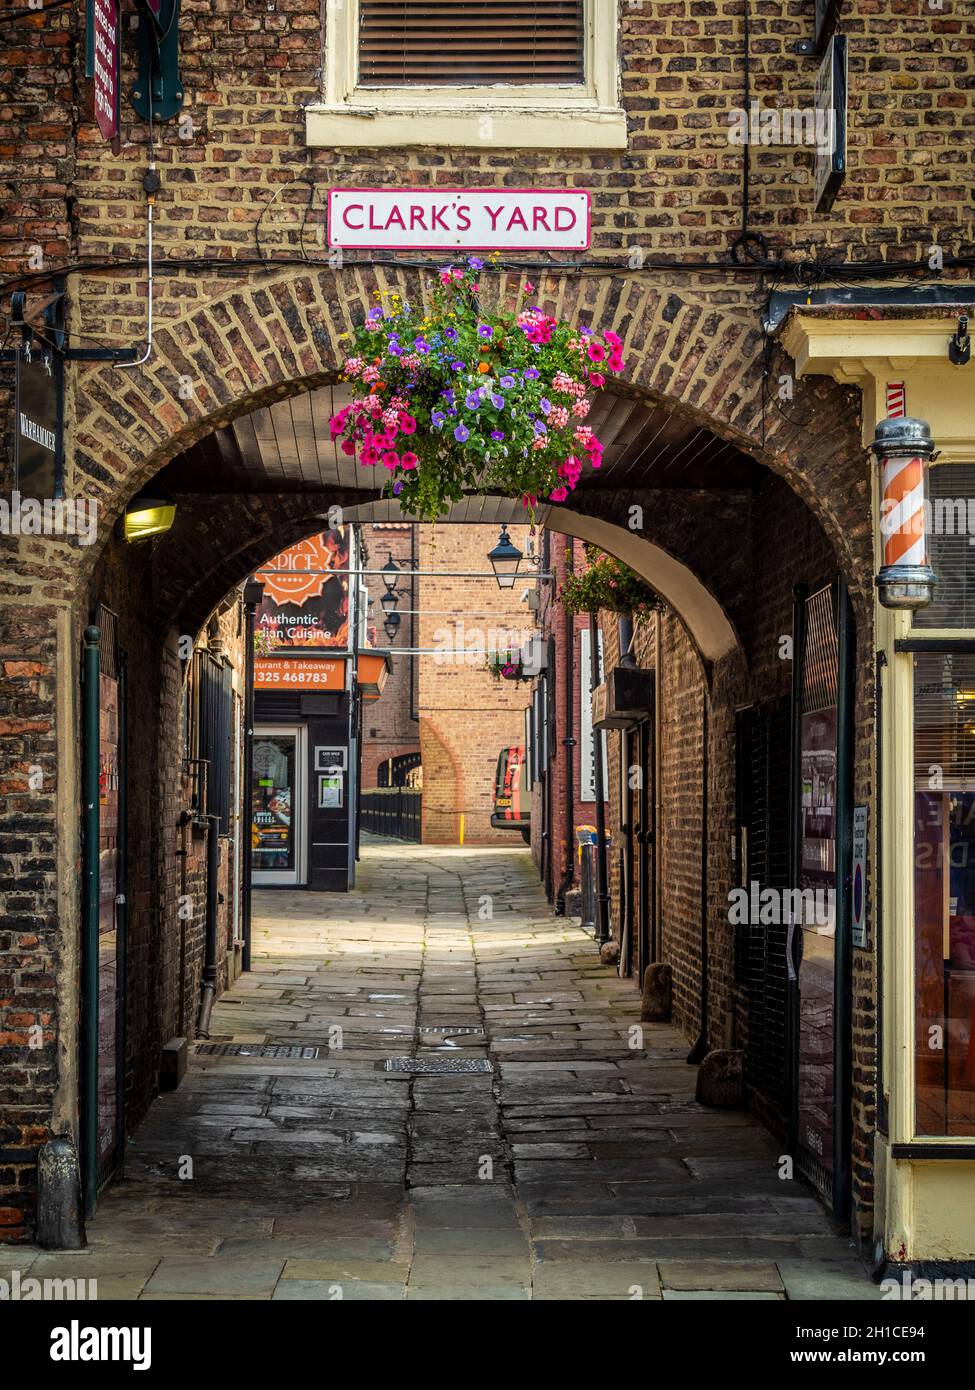 Entrance to Clark's Yard, one of three narrow alleys connecting Skinnergate to High Row in Darlington's town centre Stock Photo